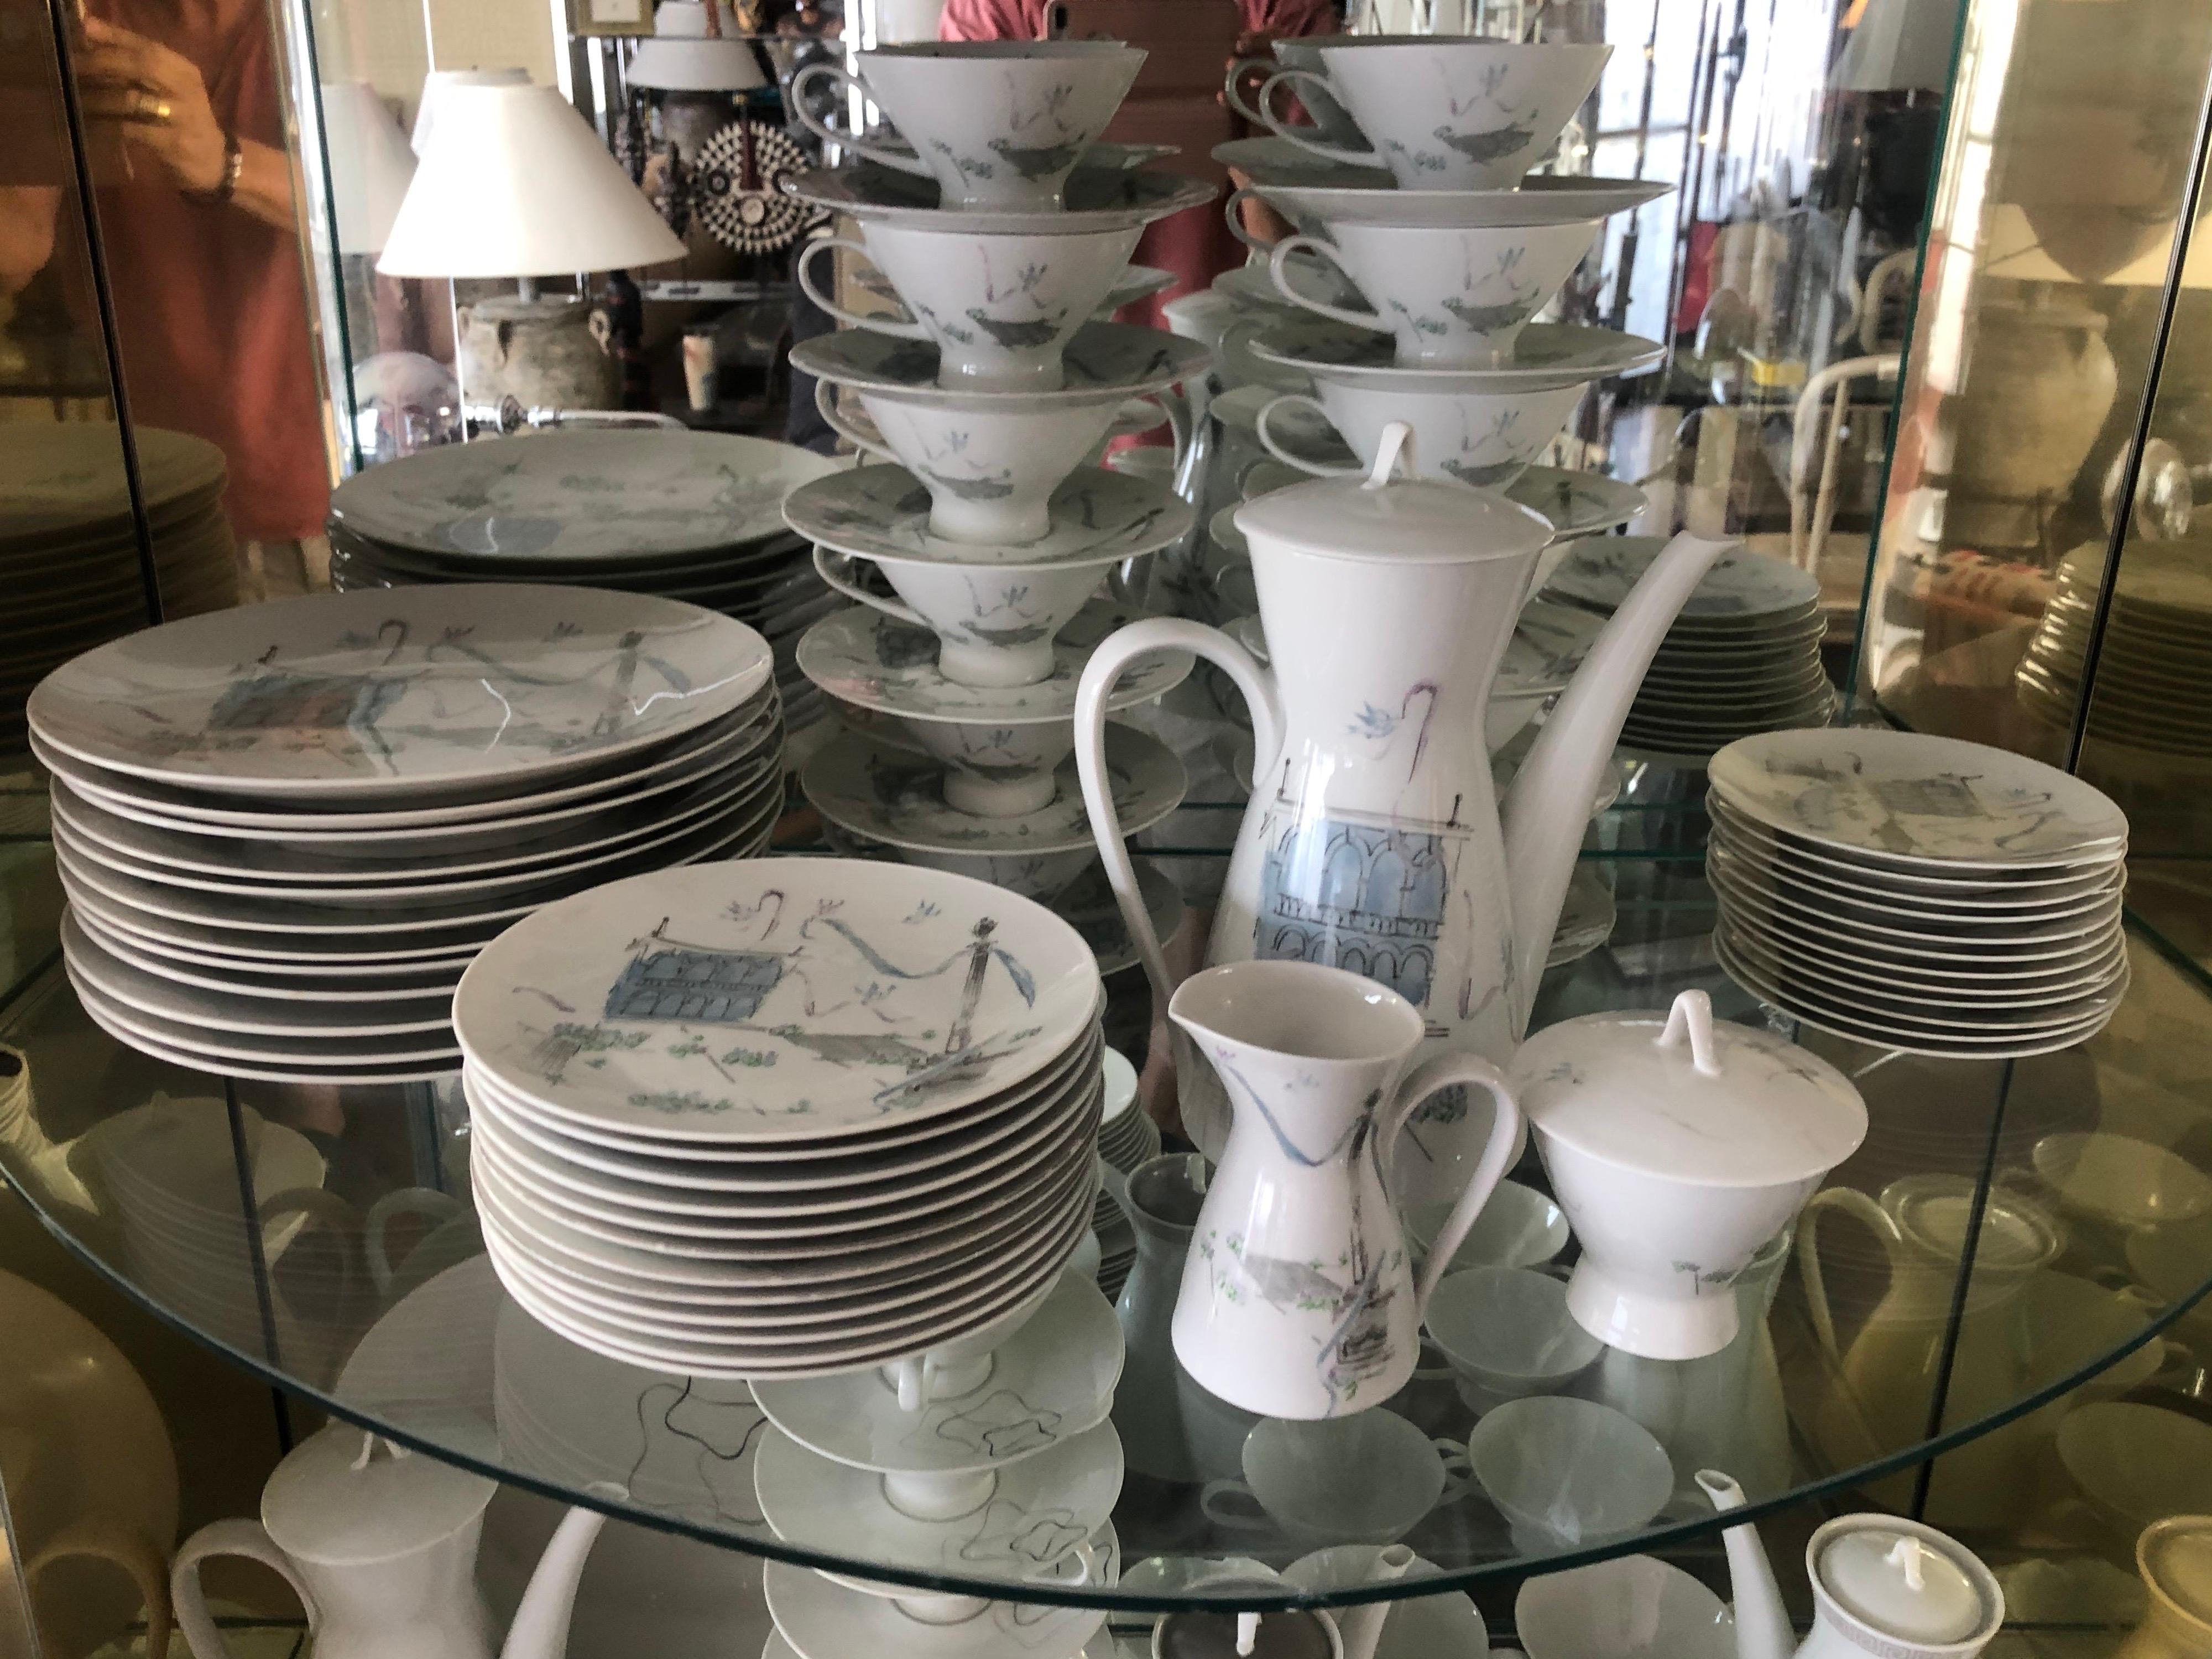  Raymond Loewy for Rosenthal “Plaza” Service for 12 Plus Porcelain Dinner Set In Good Condition For Sale In Palm Springs, CA